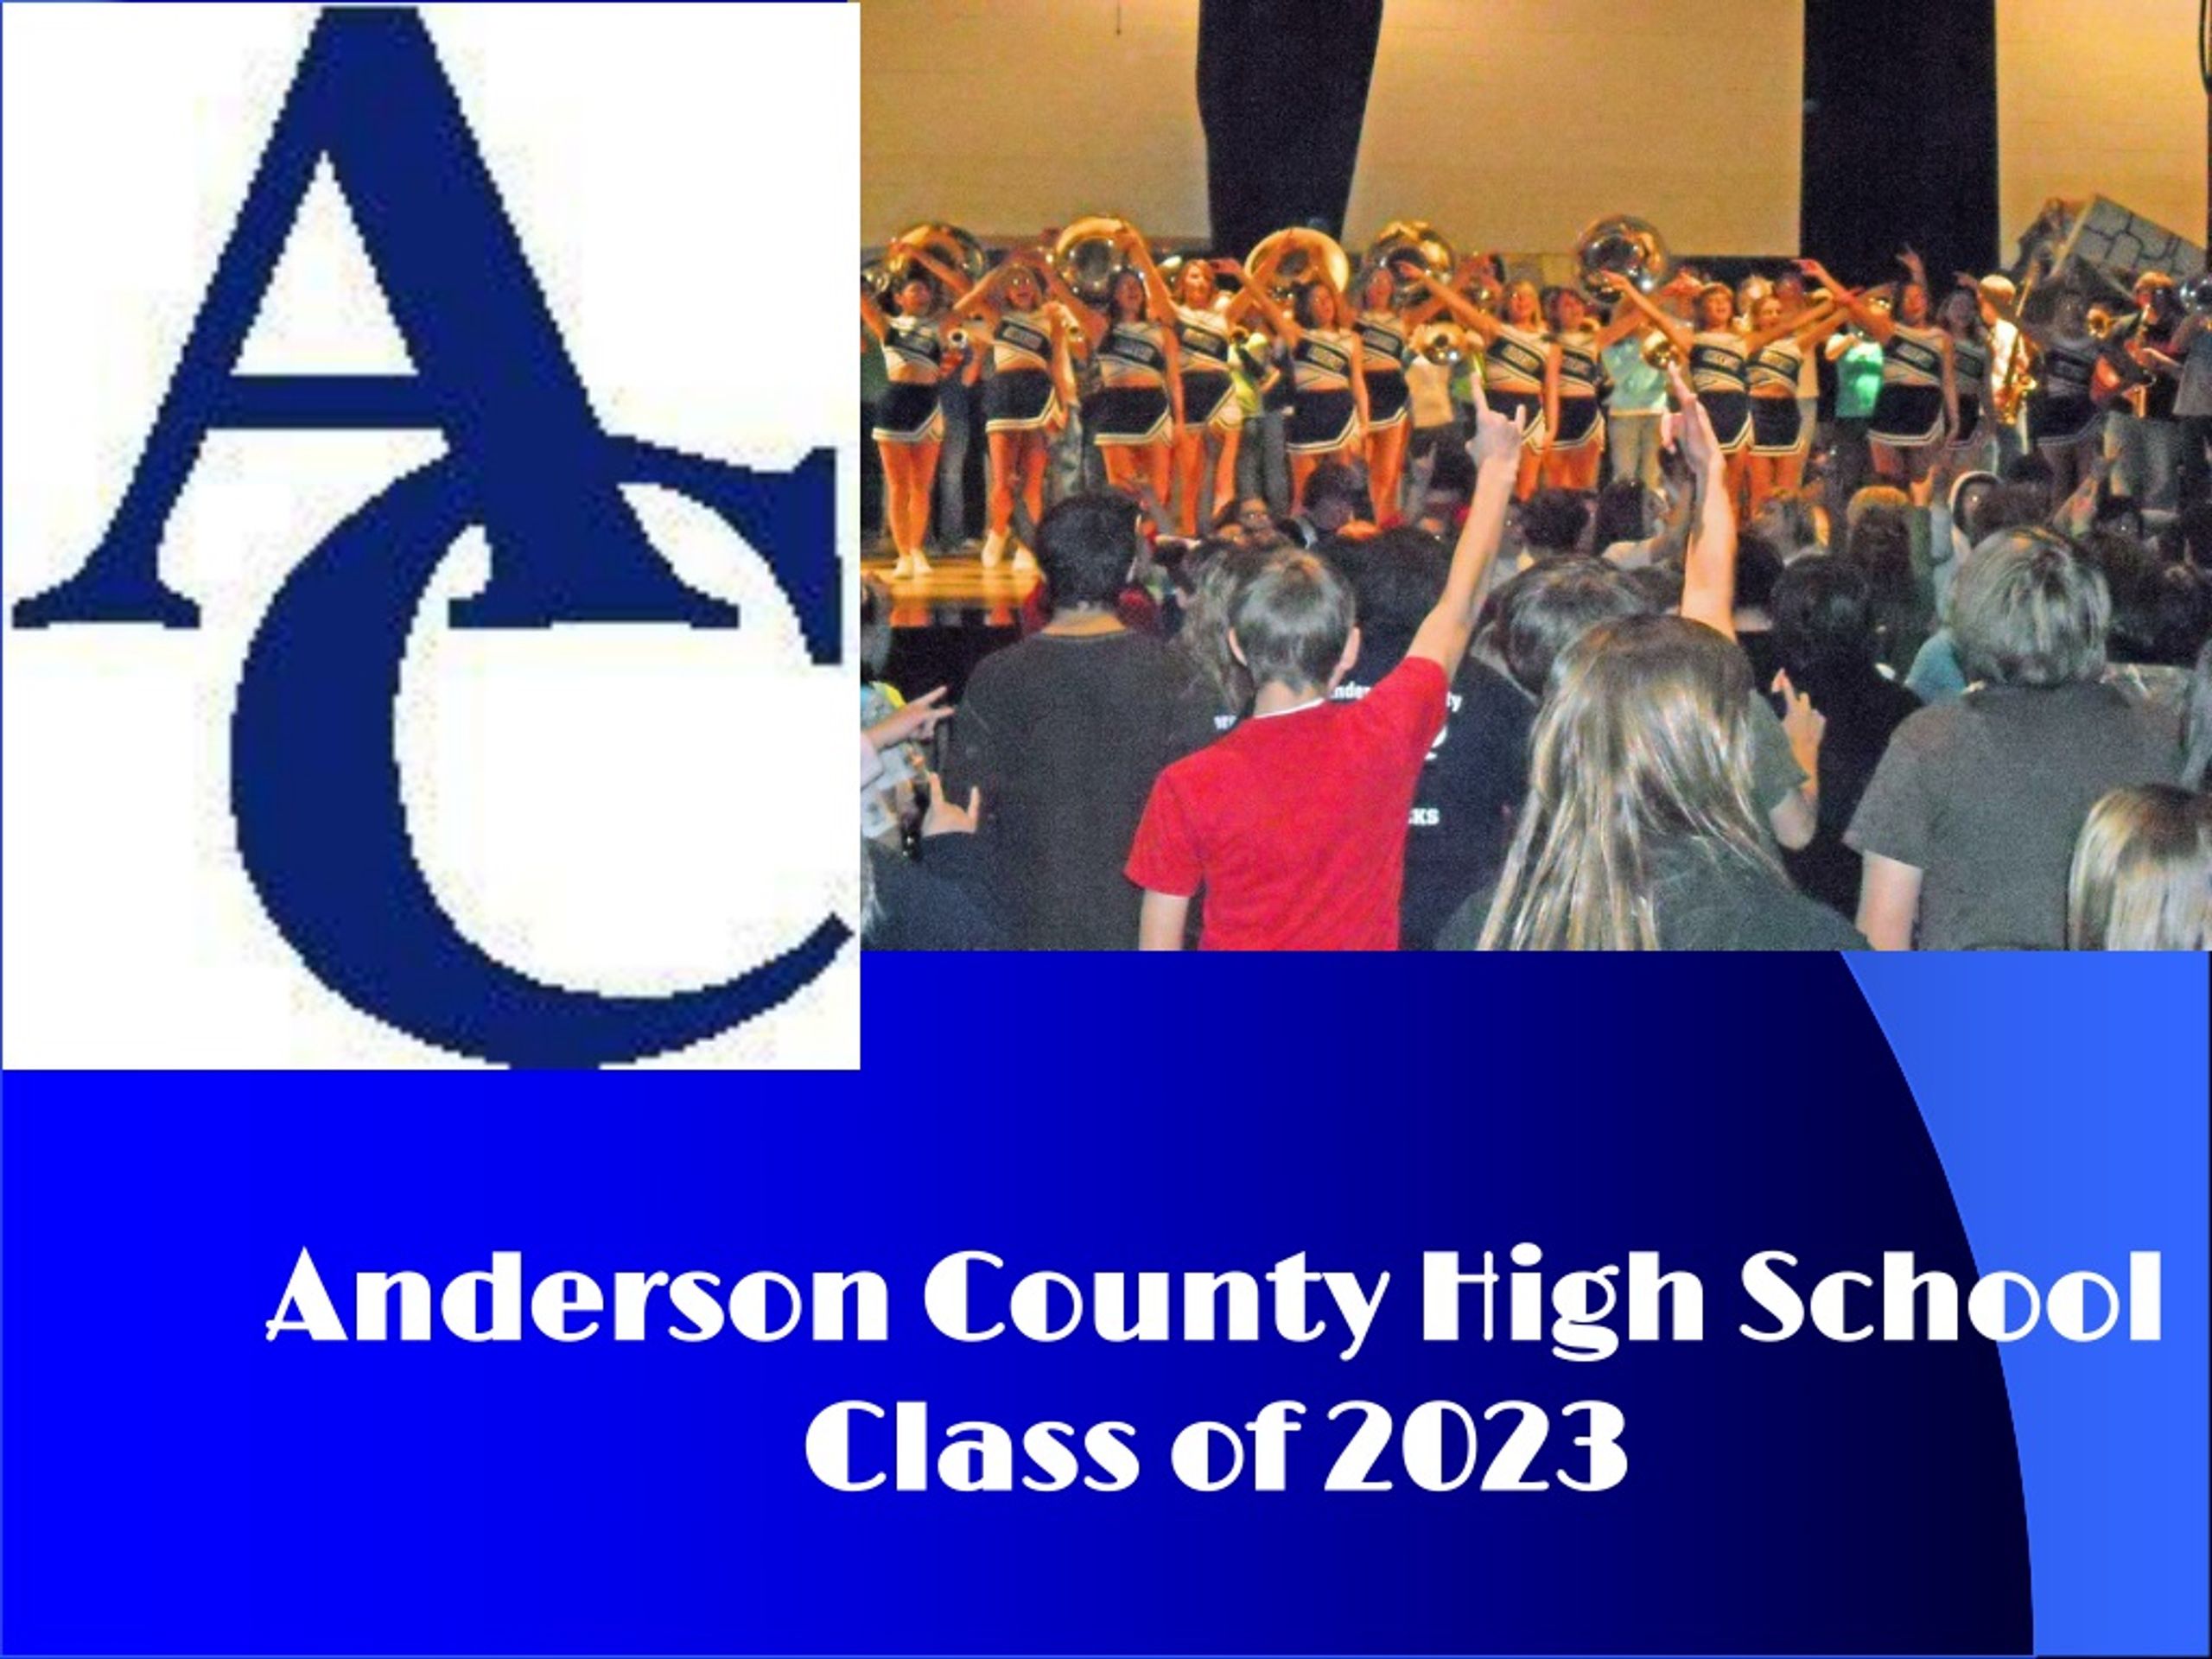 PPT Anderson County High School CLASS of 2023 PowerPoint Presentation